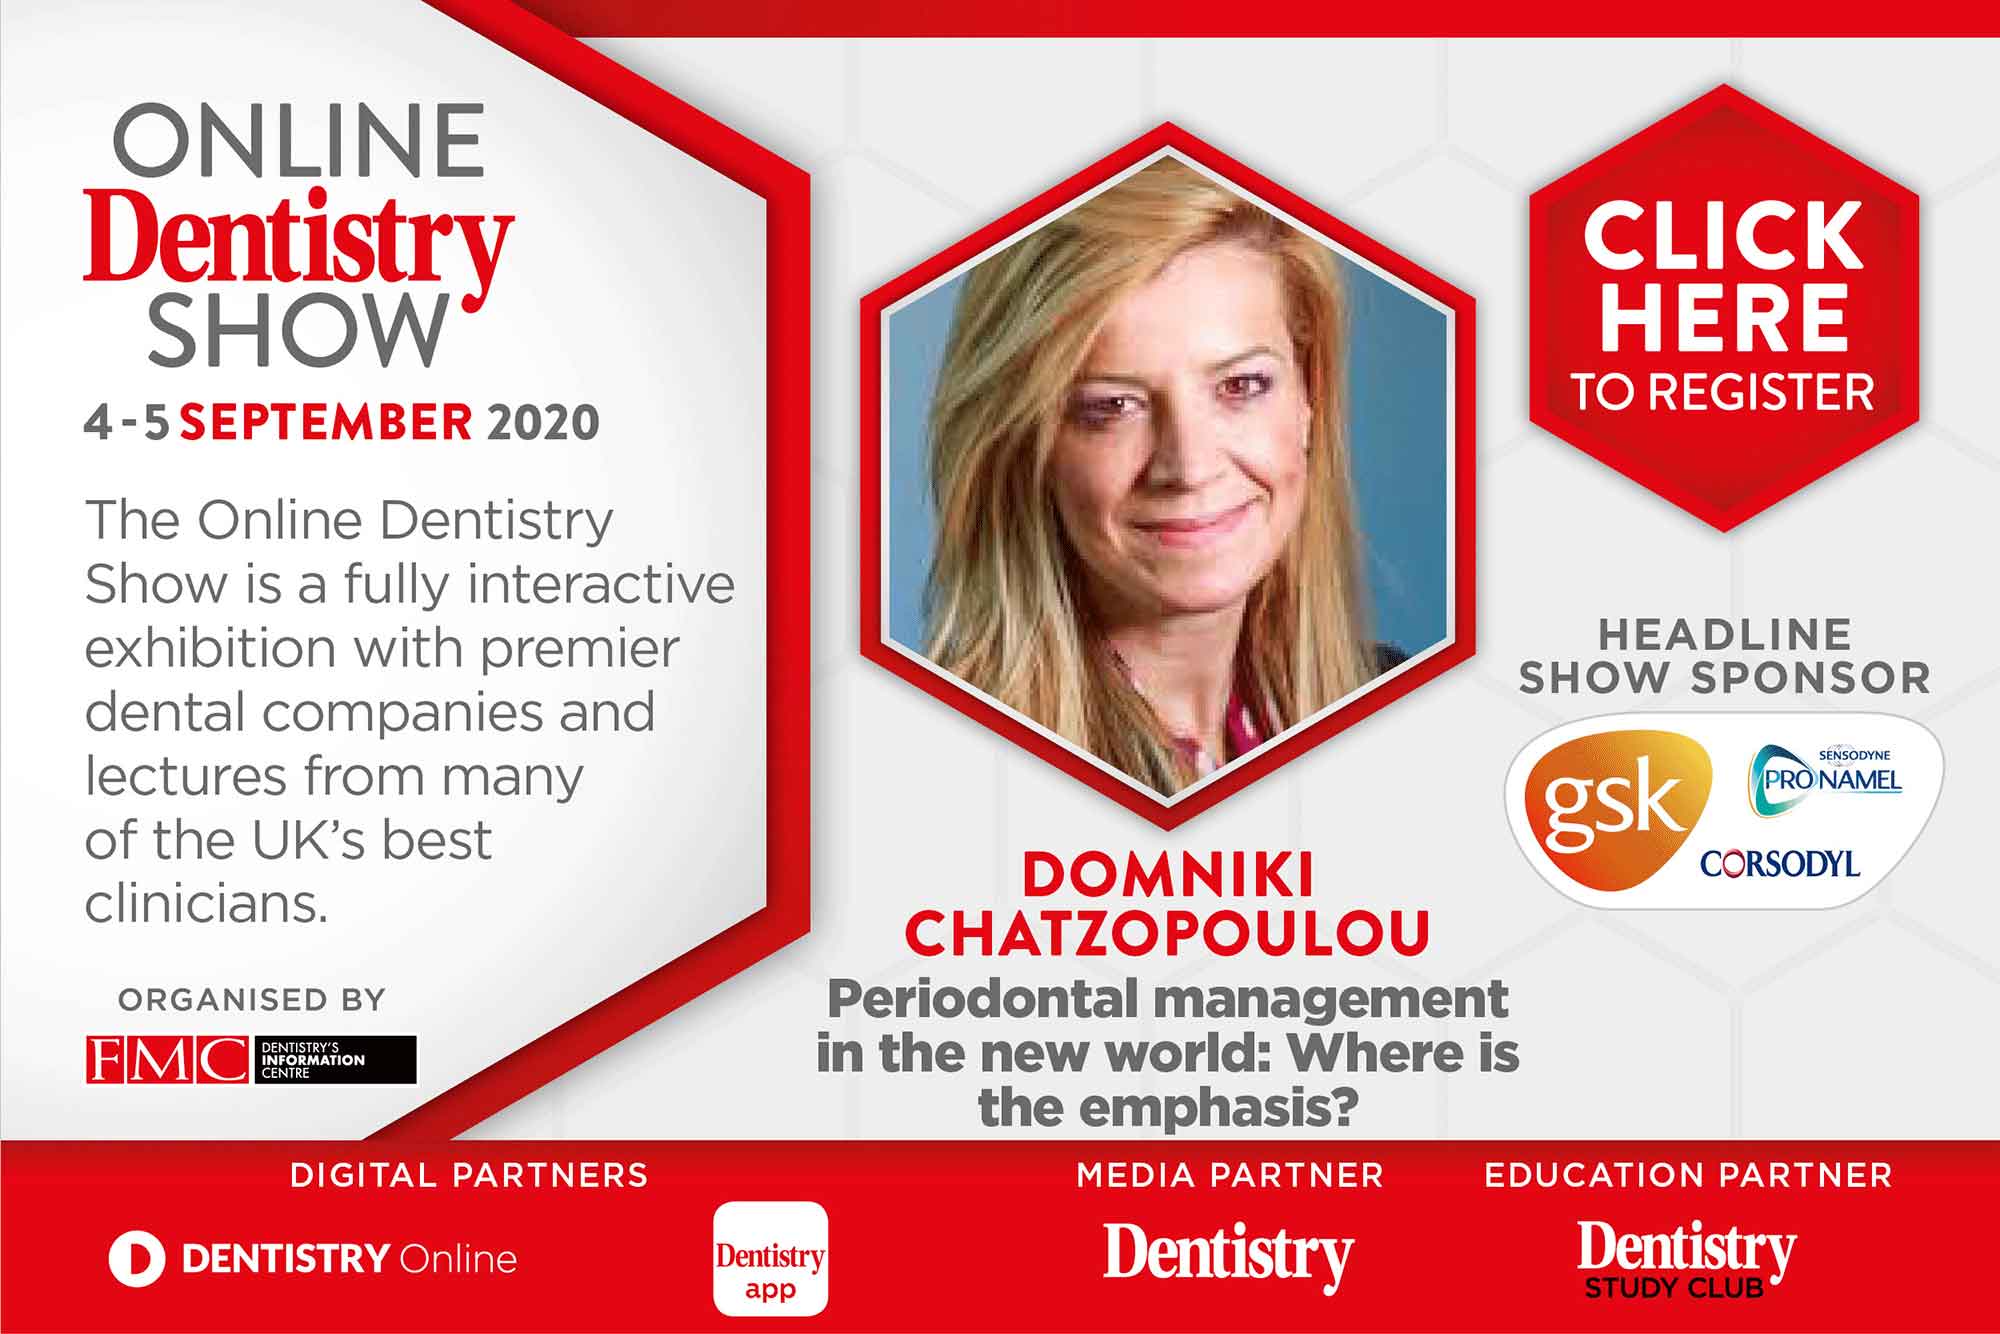 The very first Online Dentistry Show is coming to your screens this September with headline sponsors GSK